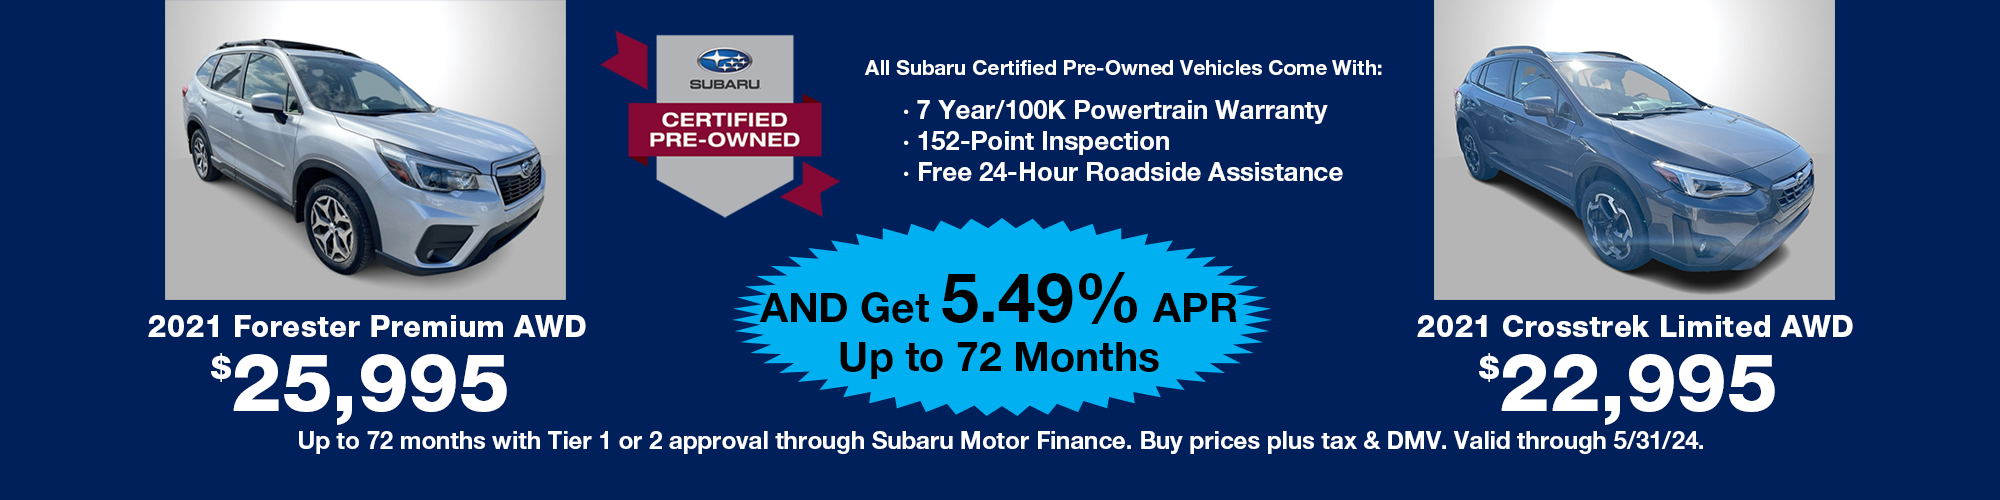 Special Offers on Subaru Certified Pre-Owned